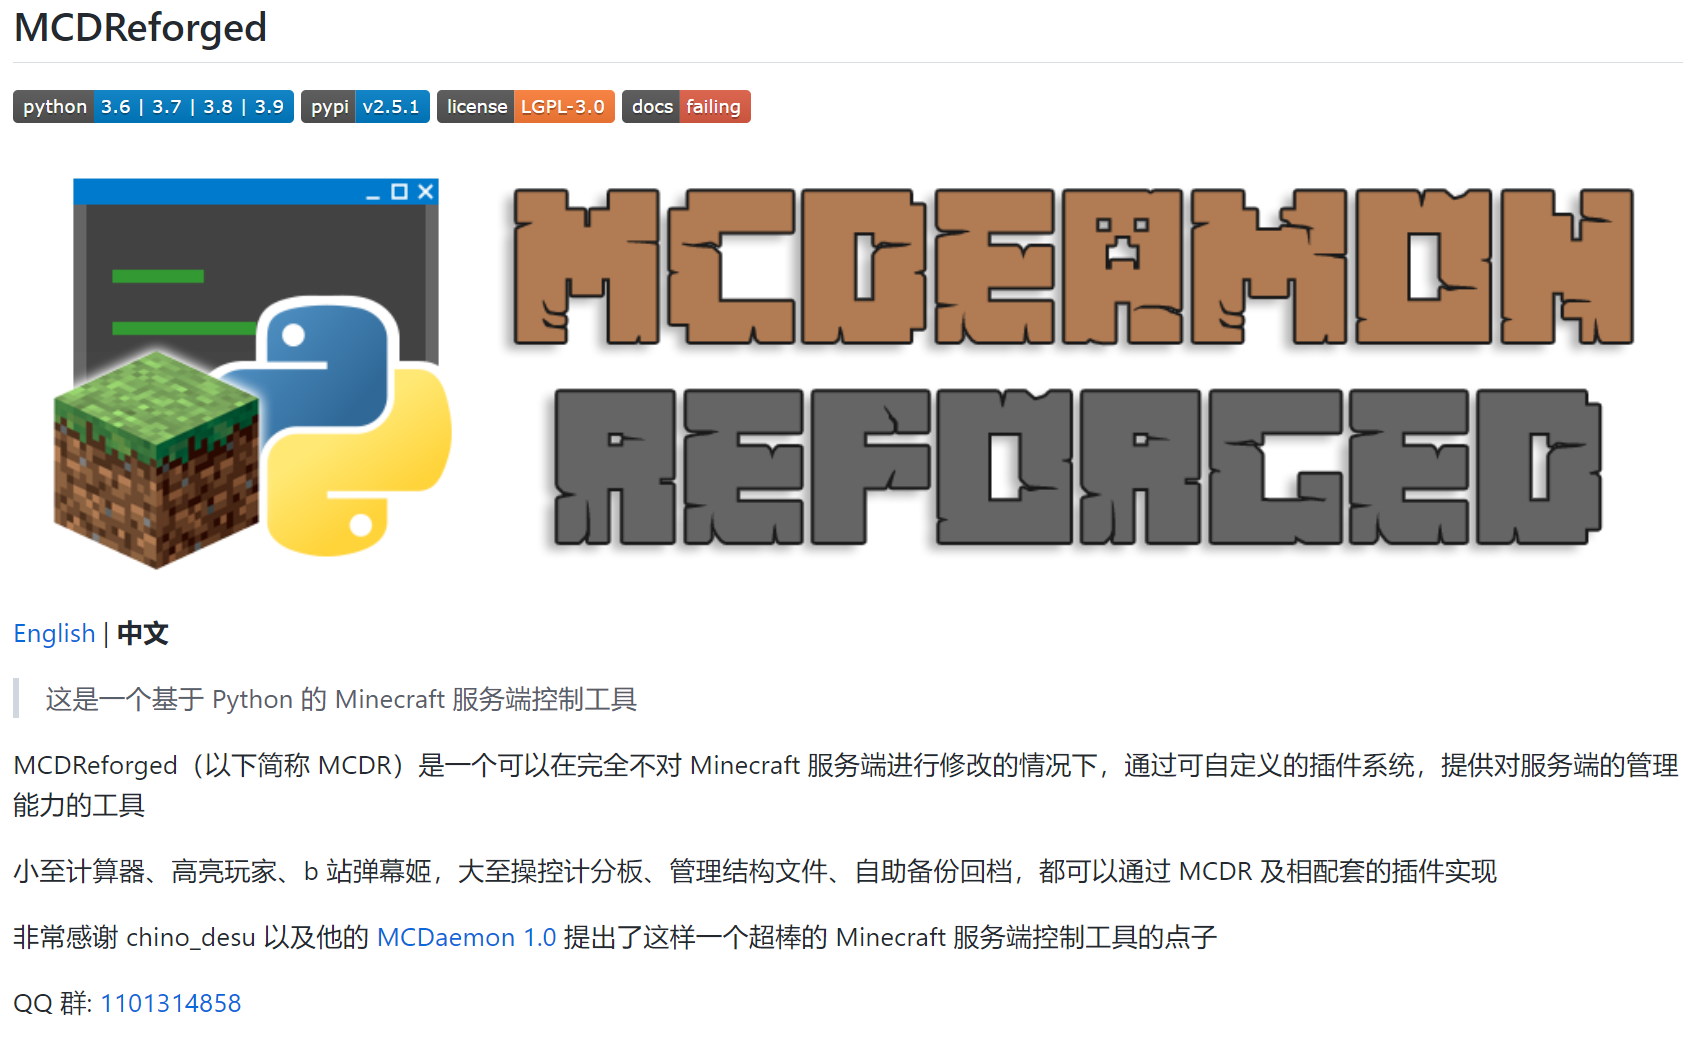 MCDReforged 的自述文件